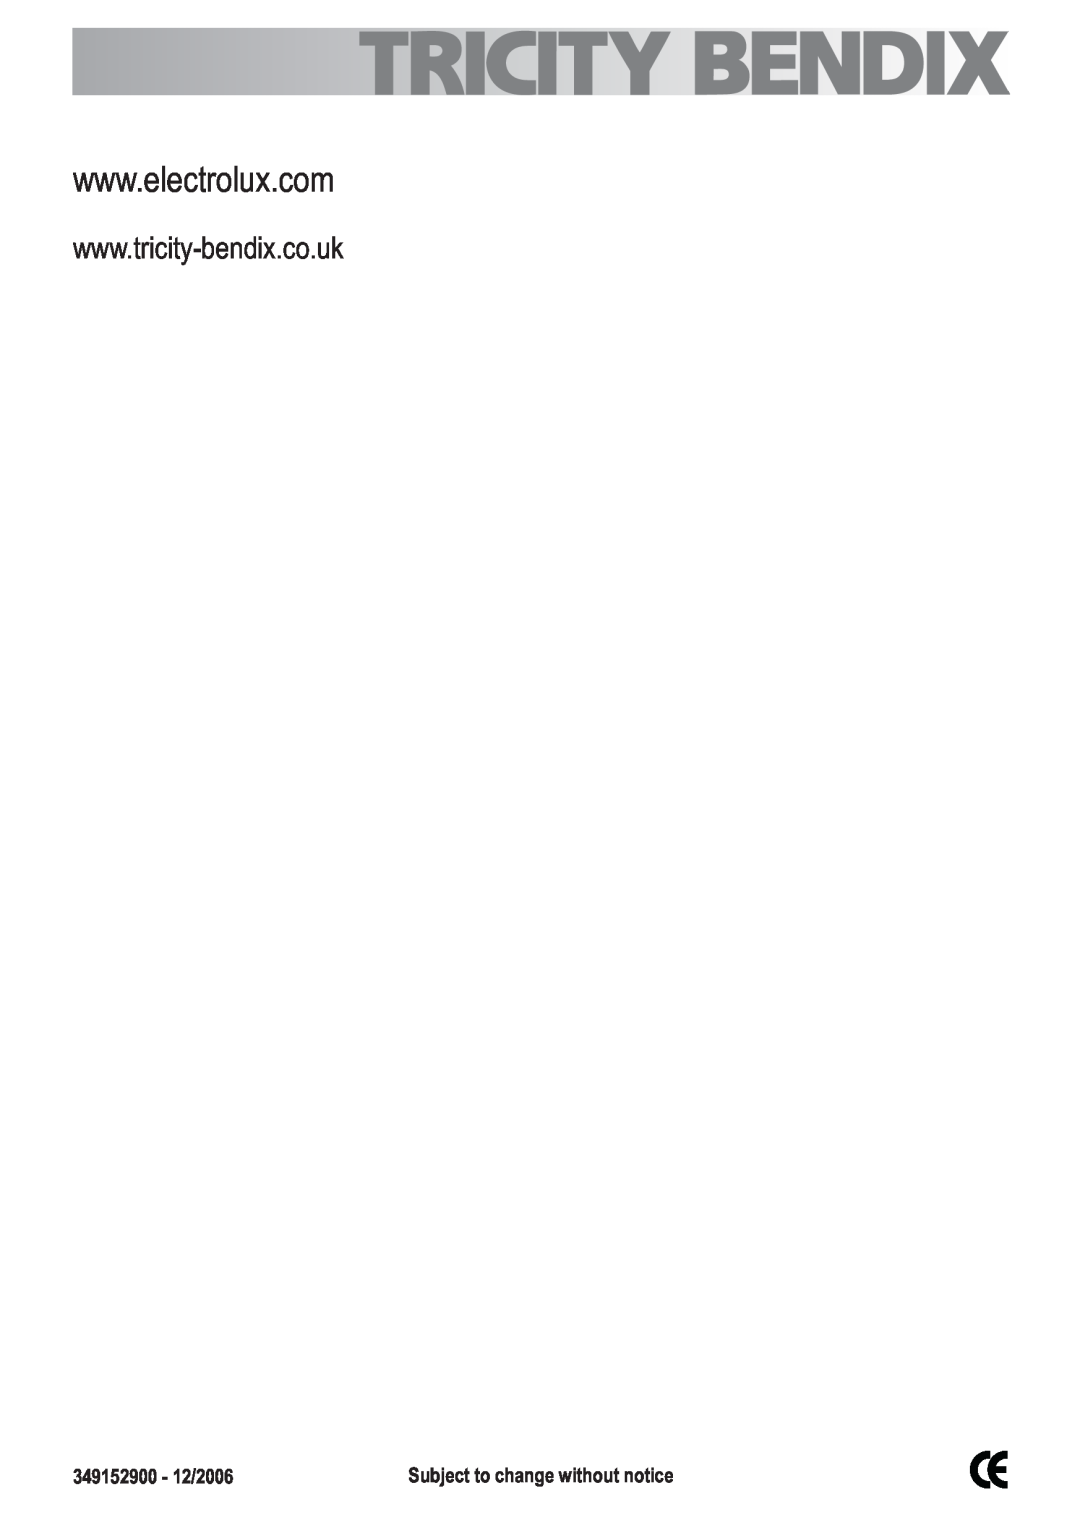 Tricity Bendix SG558/1 user manual 349152900 - 12/2006, Subject to change without notice 